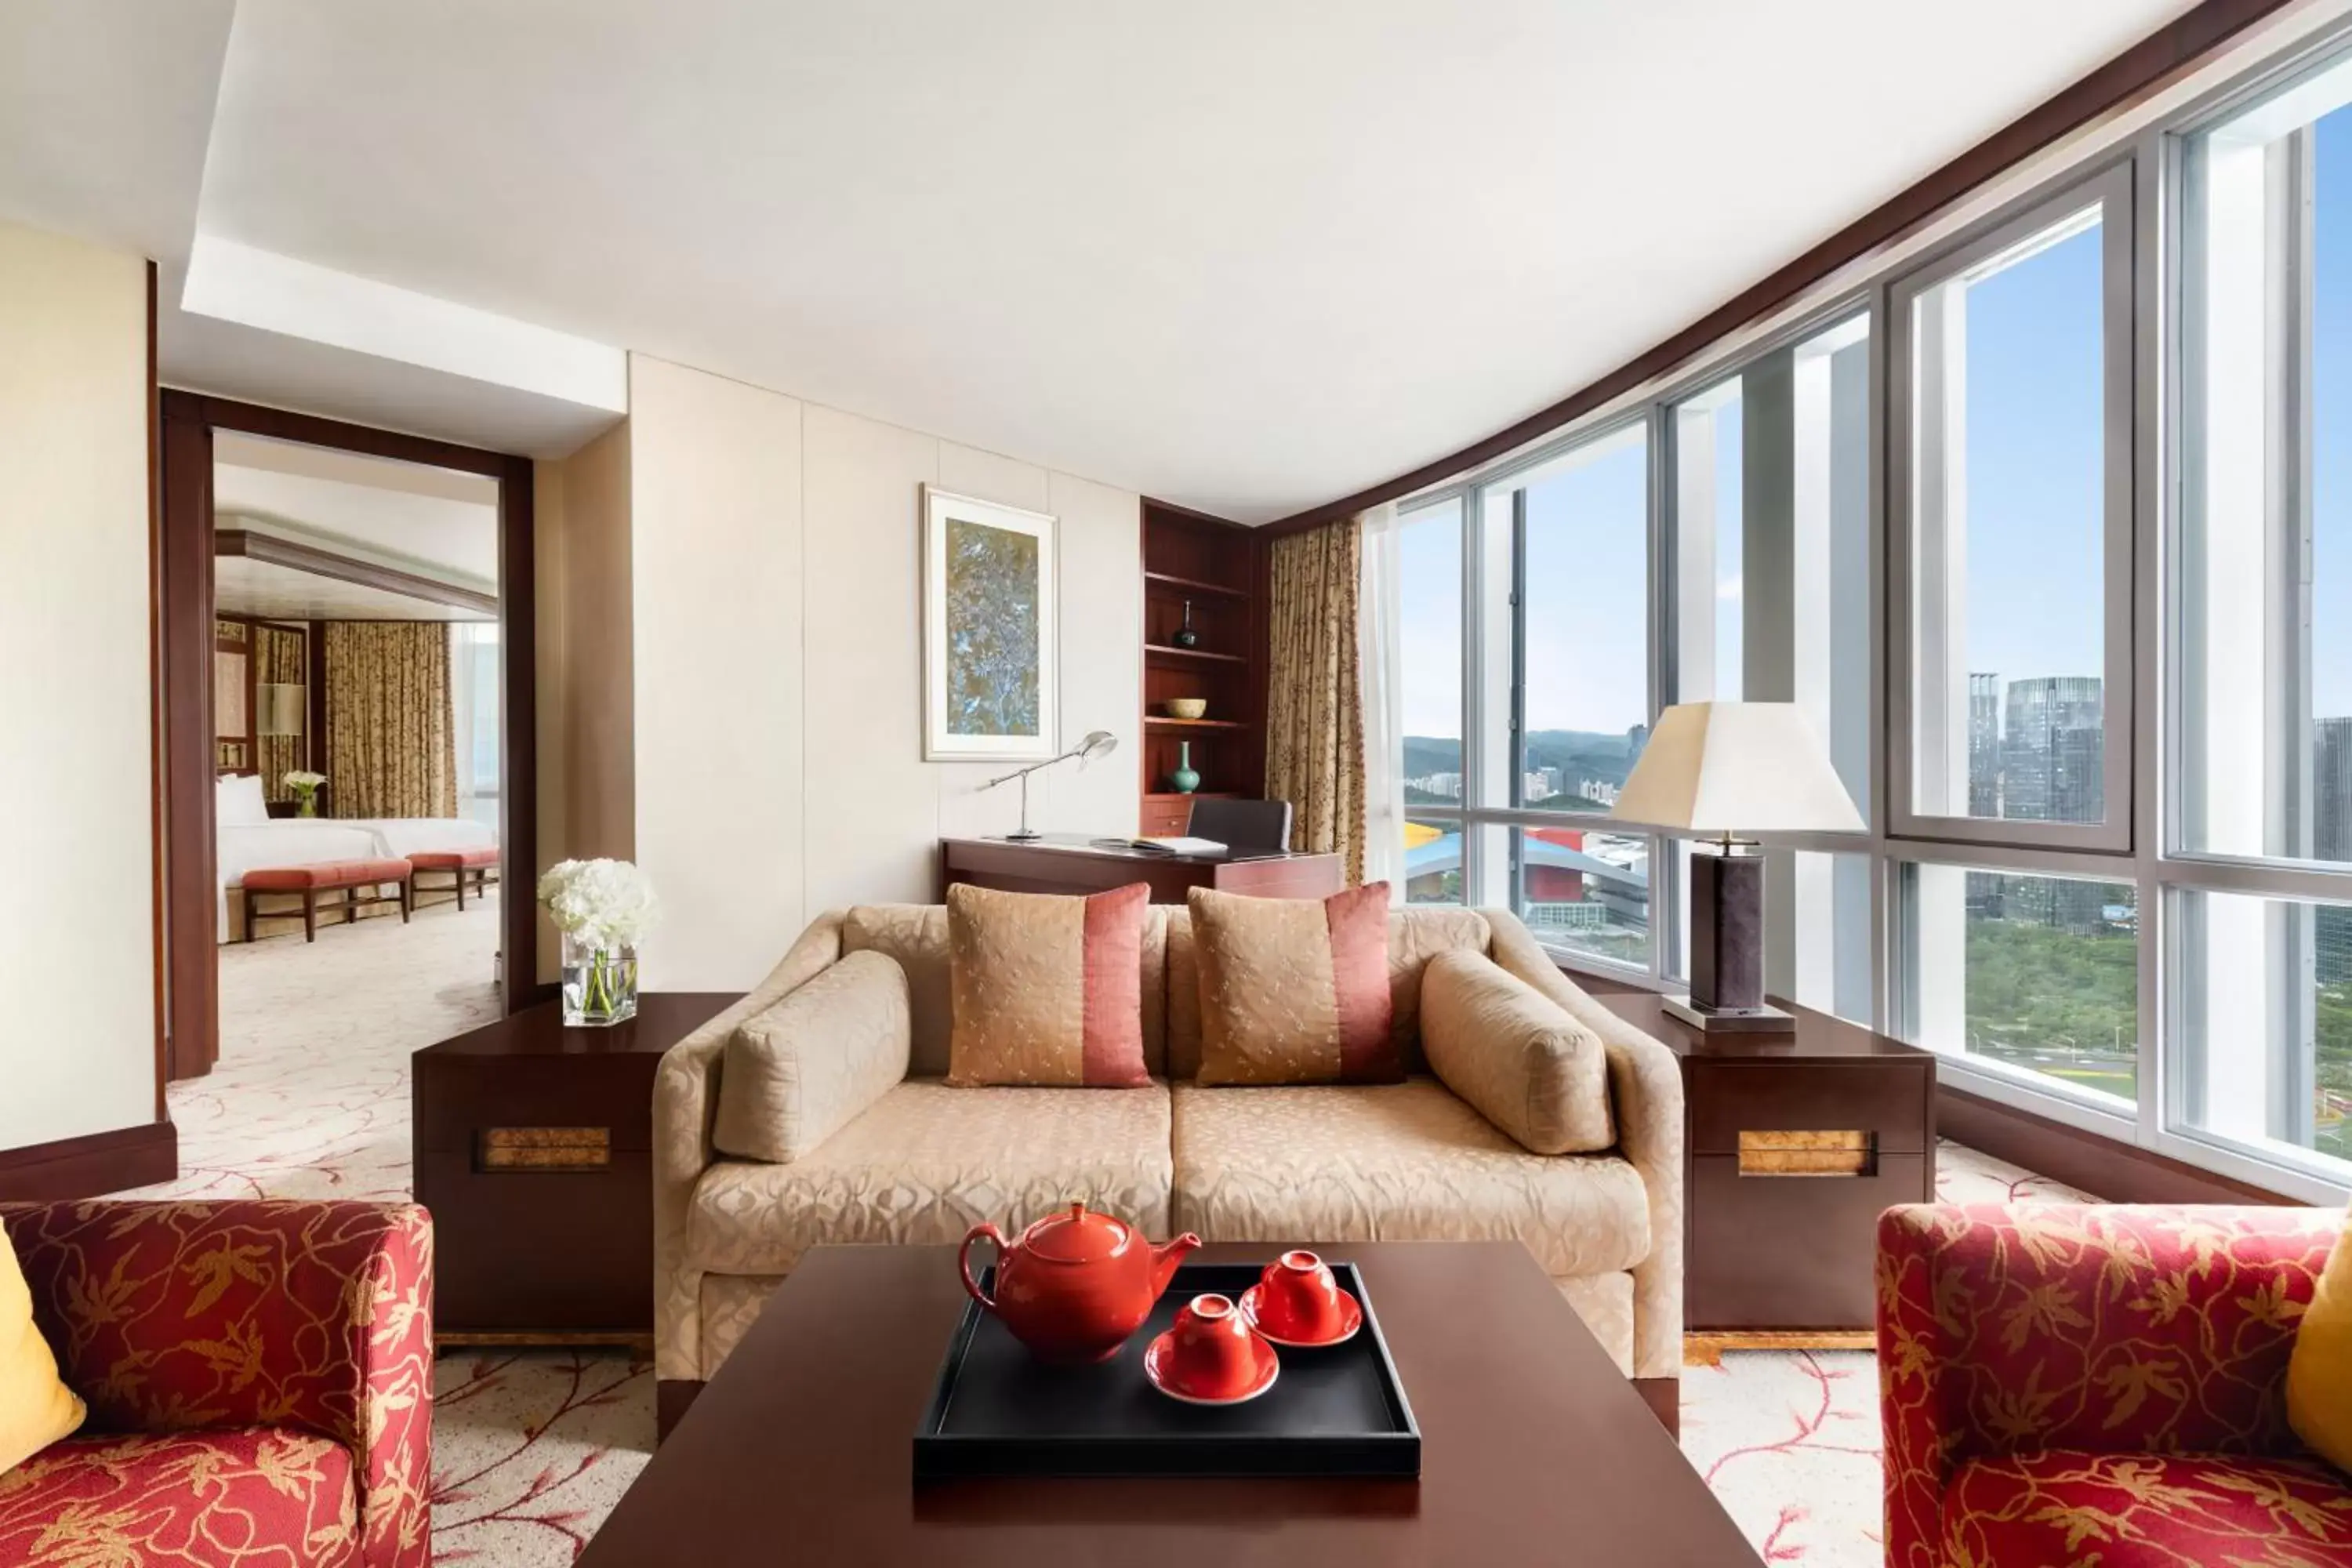 Executive Suite - with Executive lounge access in Futian Shangri-La, Shenzhen,Near to Shenzhen Convention&Exhibition Centre, Futian Railway Station